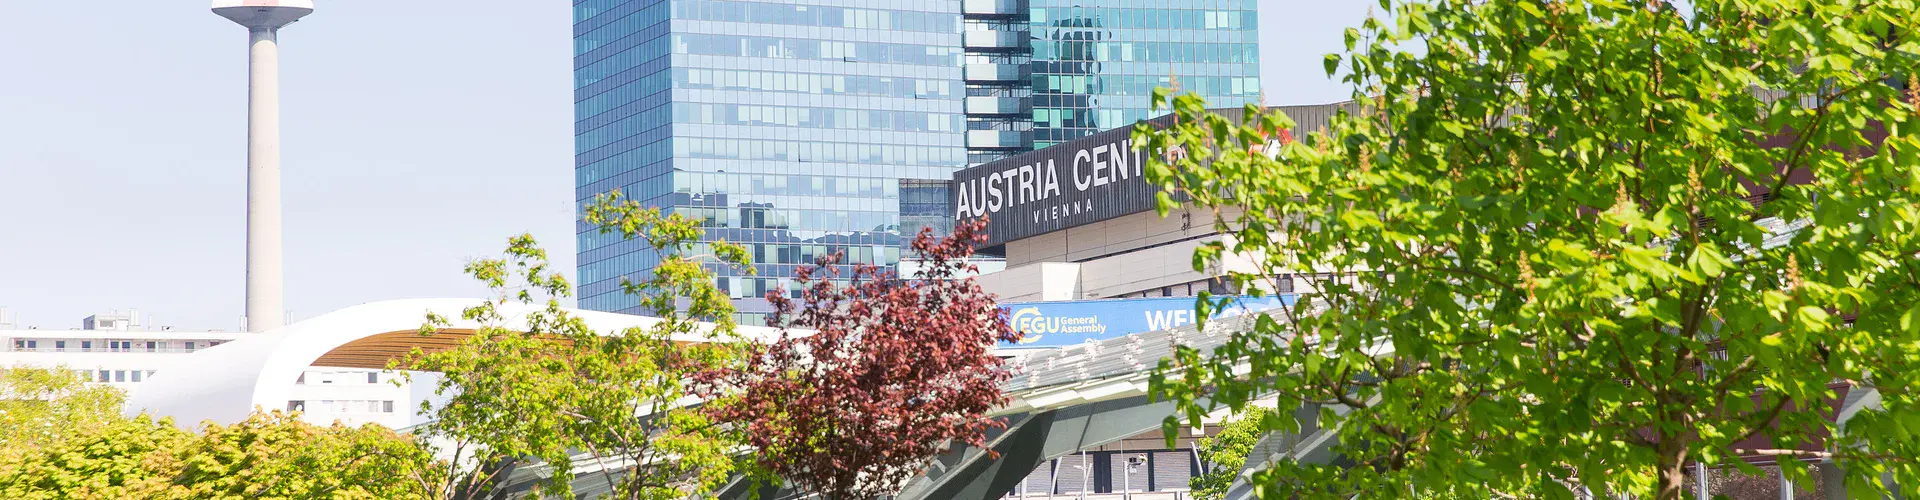 The path leading to the Austria Center Vienna during the EGU 2016 General Assembly (Credit: EGU/Foto Pfluegl)